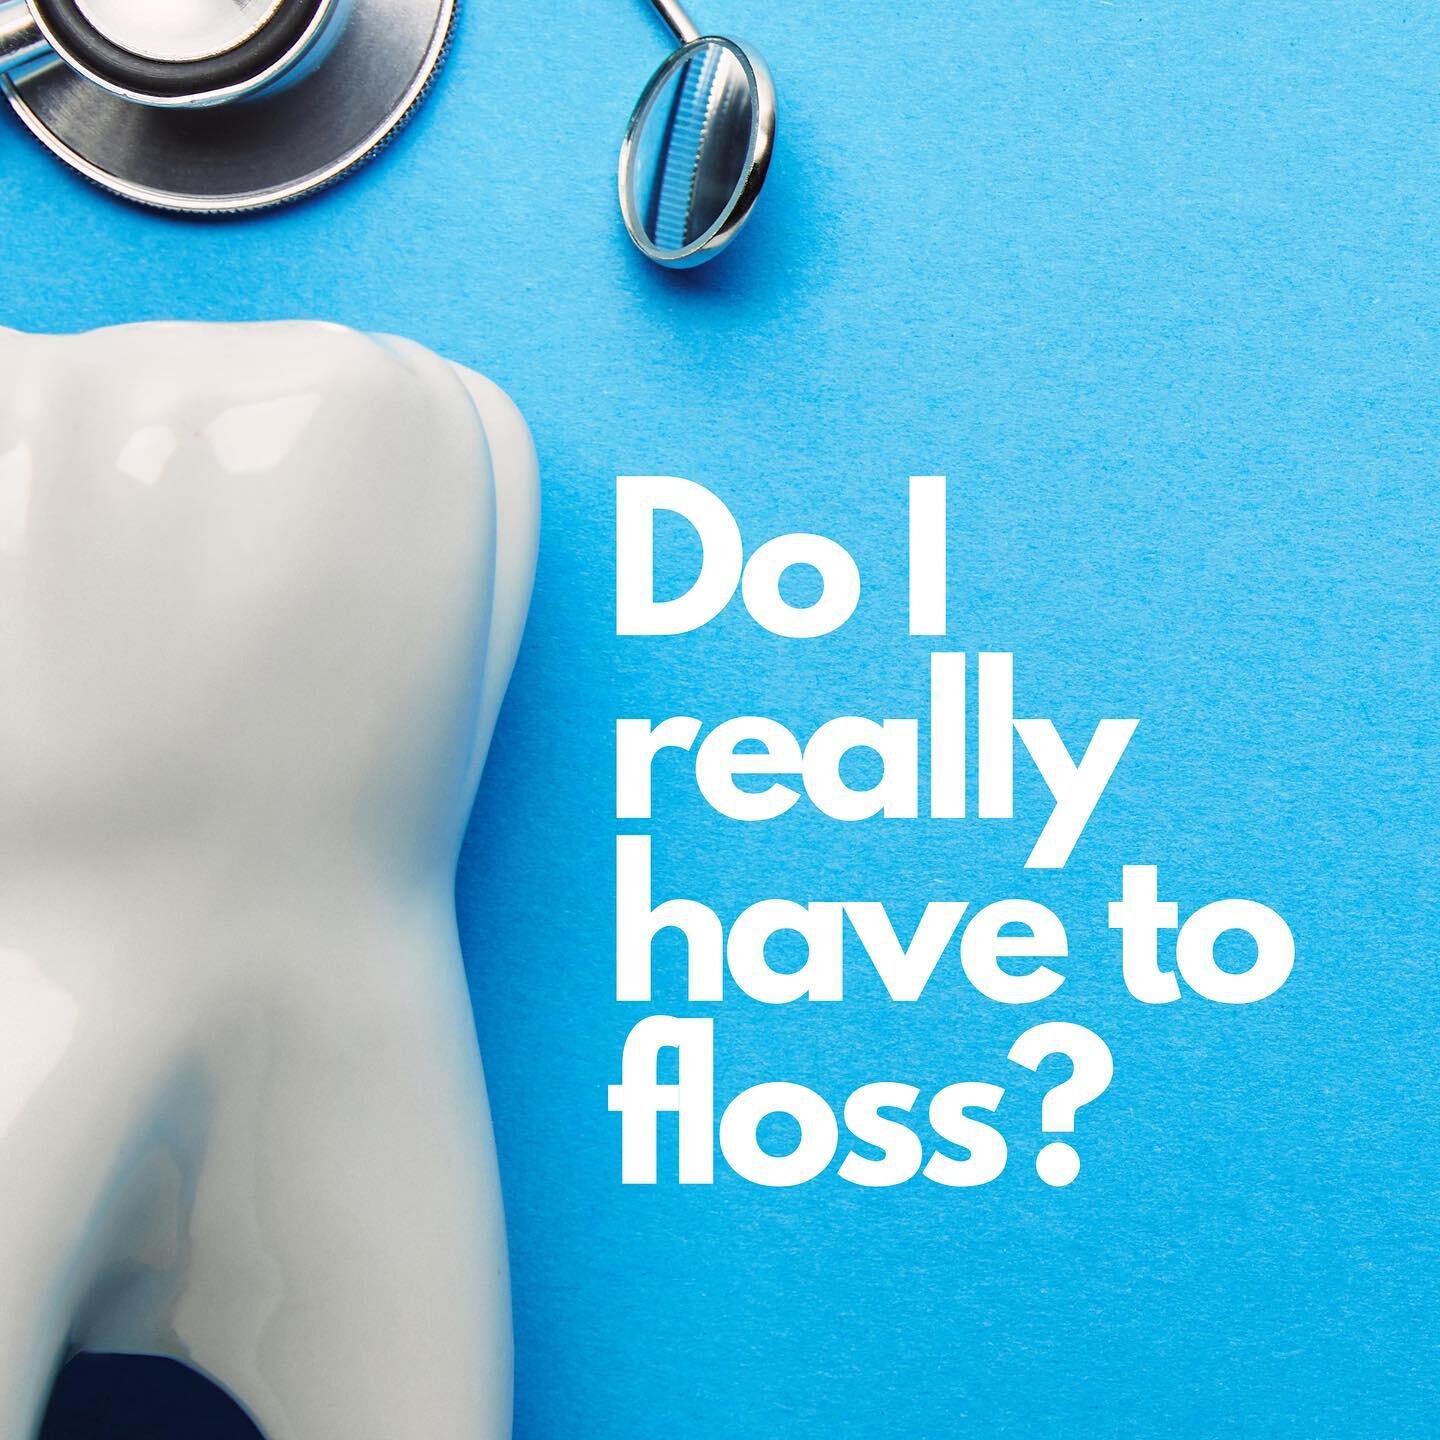 Ok, but is flossing really worth it? 

#flossing #dentalhygienist #dentist #dentistry #dentalhygiene #tooth #toothless #businessowner #smilequotes #smile #flossboss